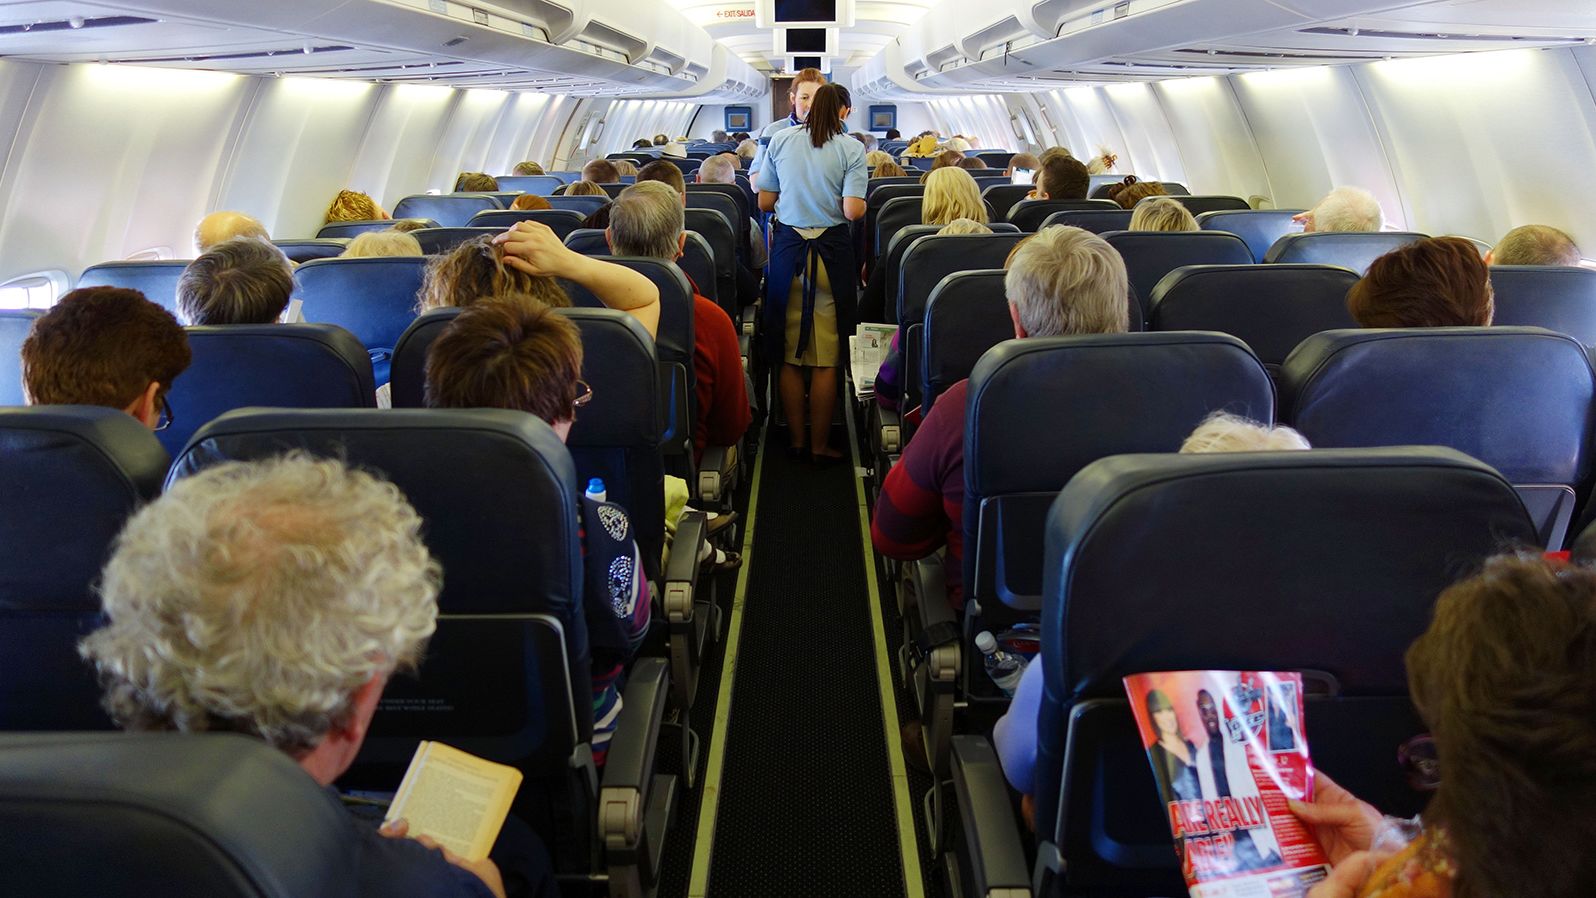 D91B8X Passengers on a aeroplane, interior of seating area on aircraft, passengers in economy seats during flight